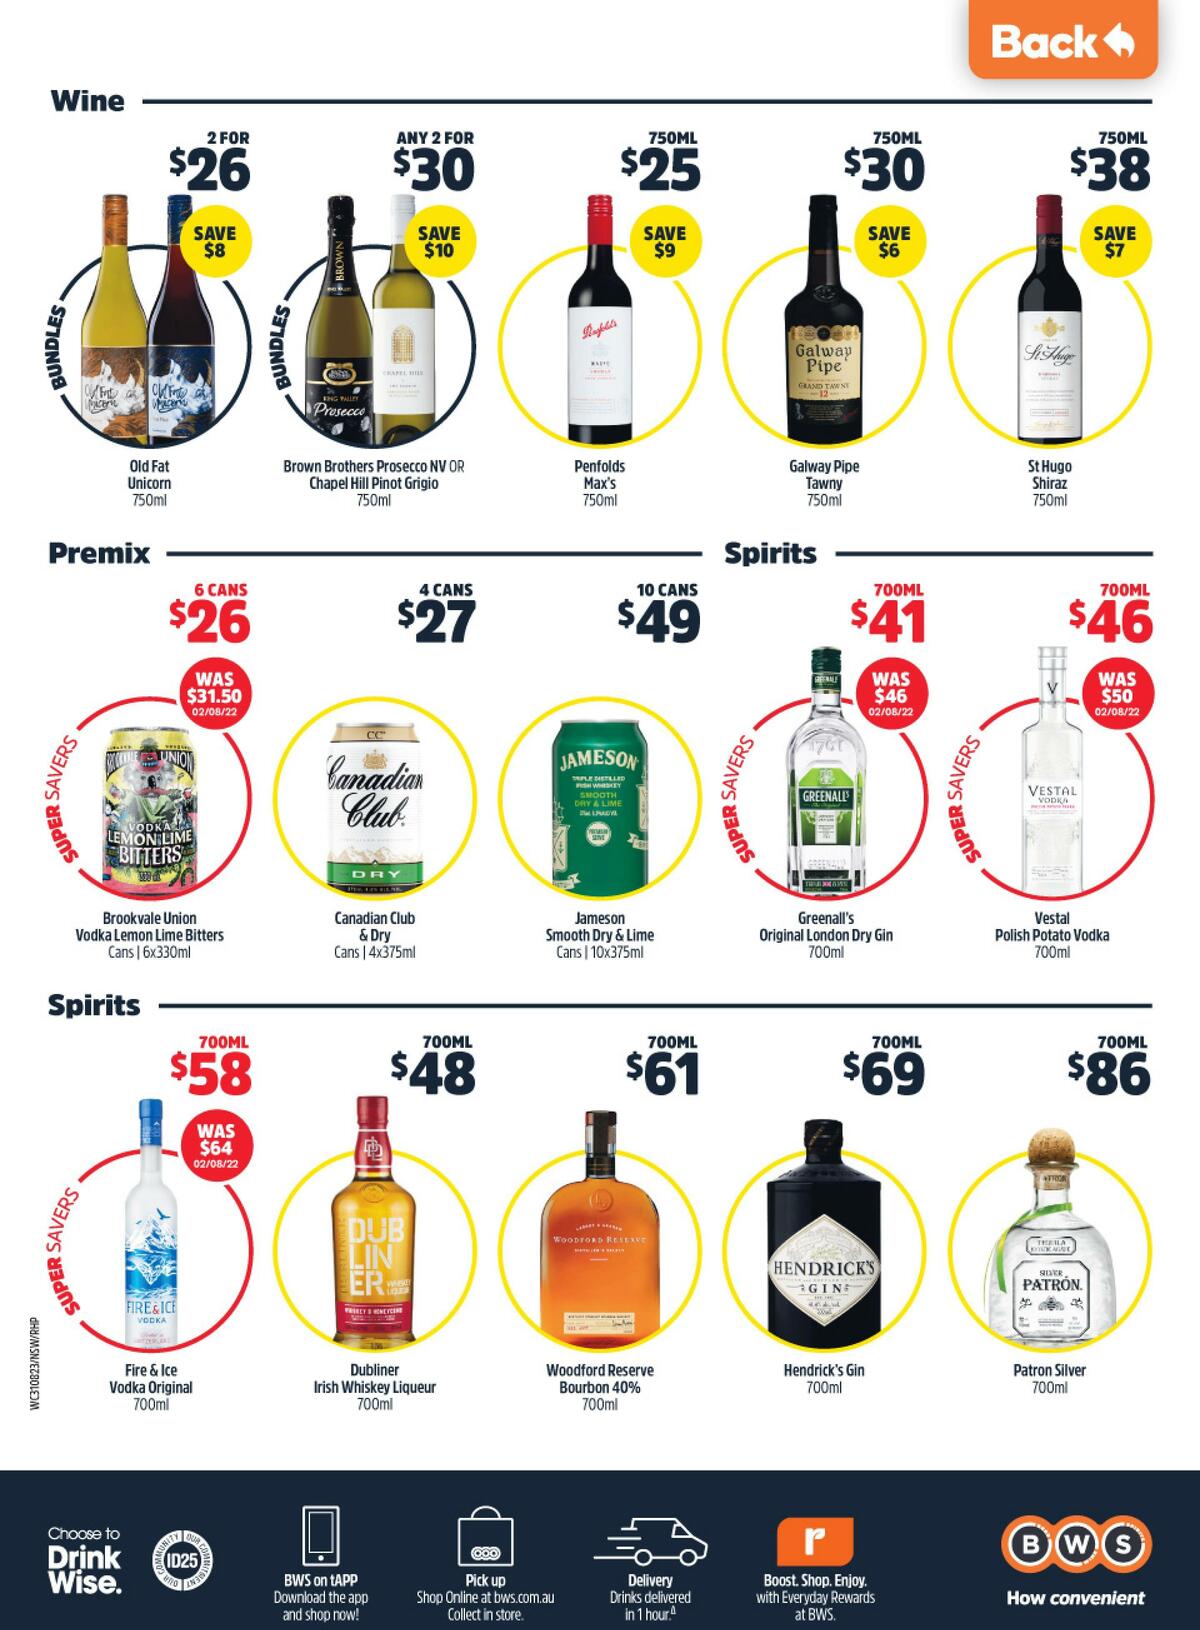 Woolworths Catalogues from 31 August